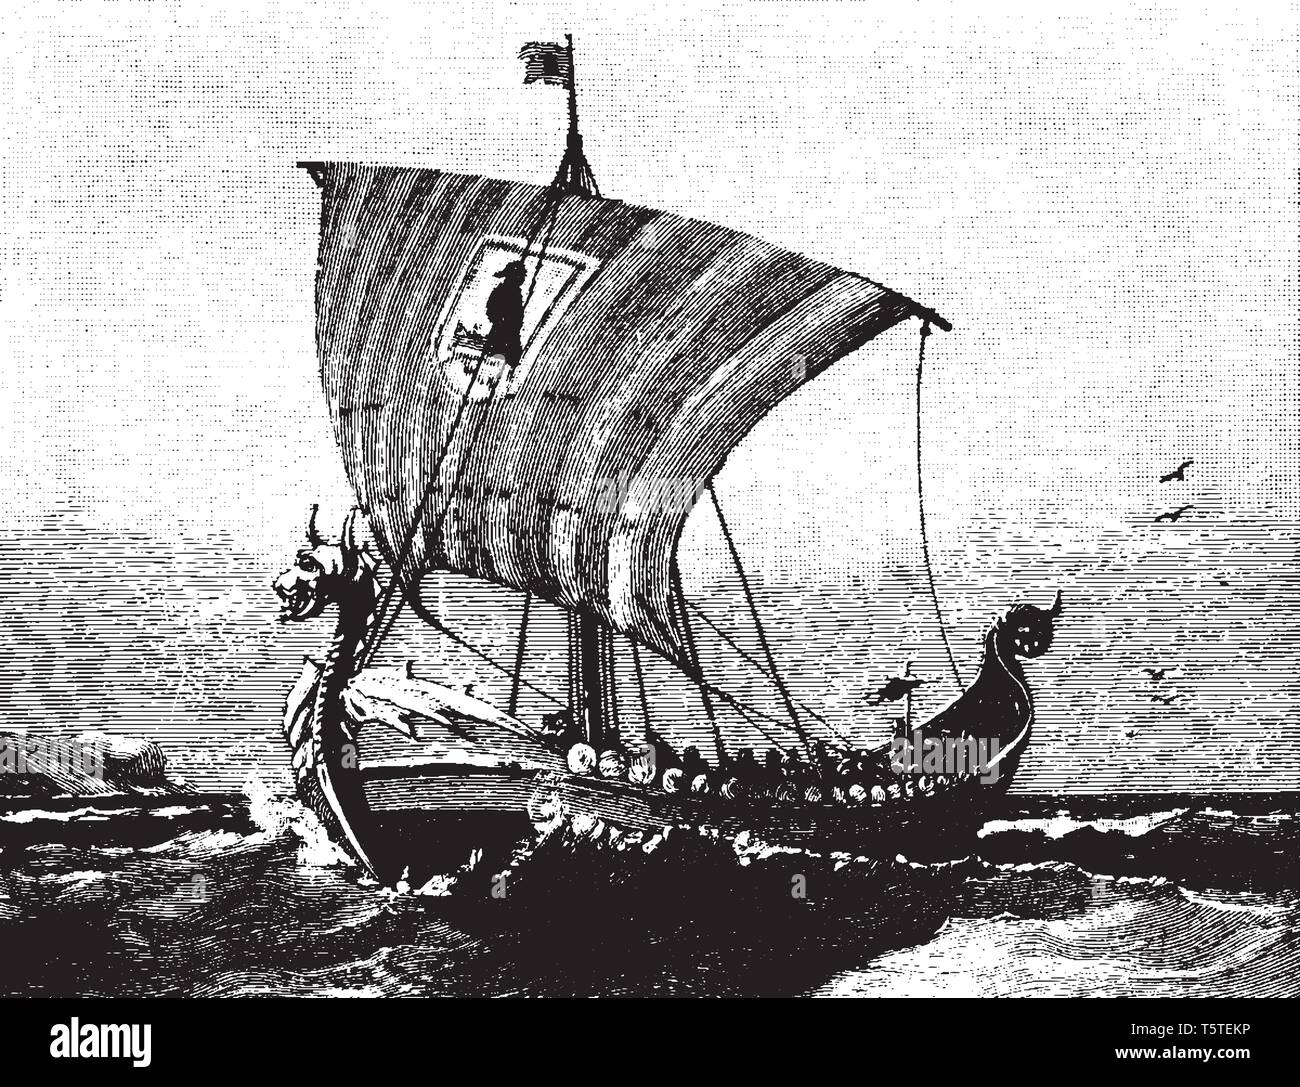 Viking Ships were marine vessels of unique design built by the Vikings ...